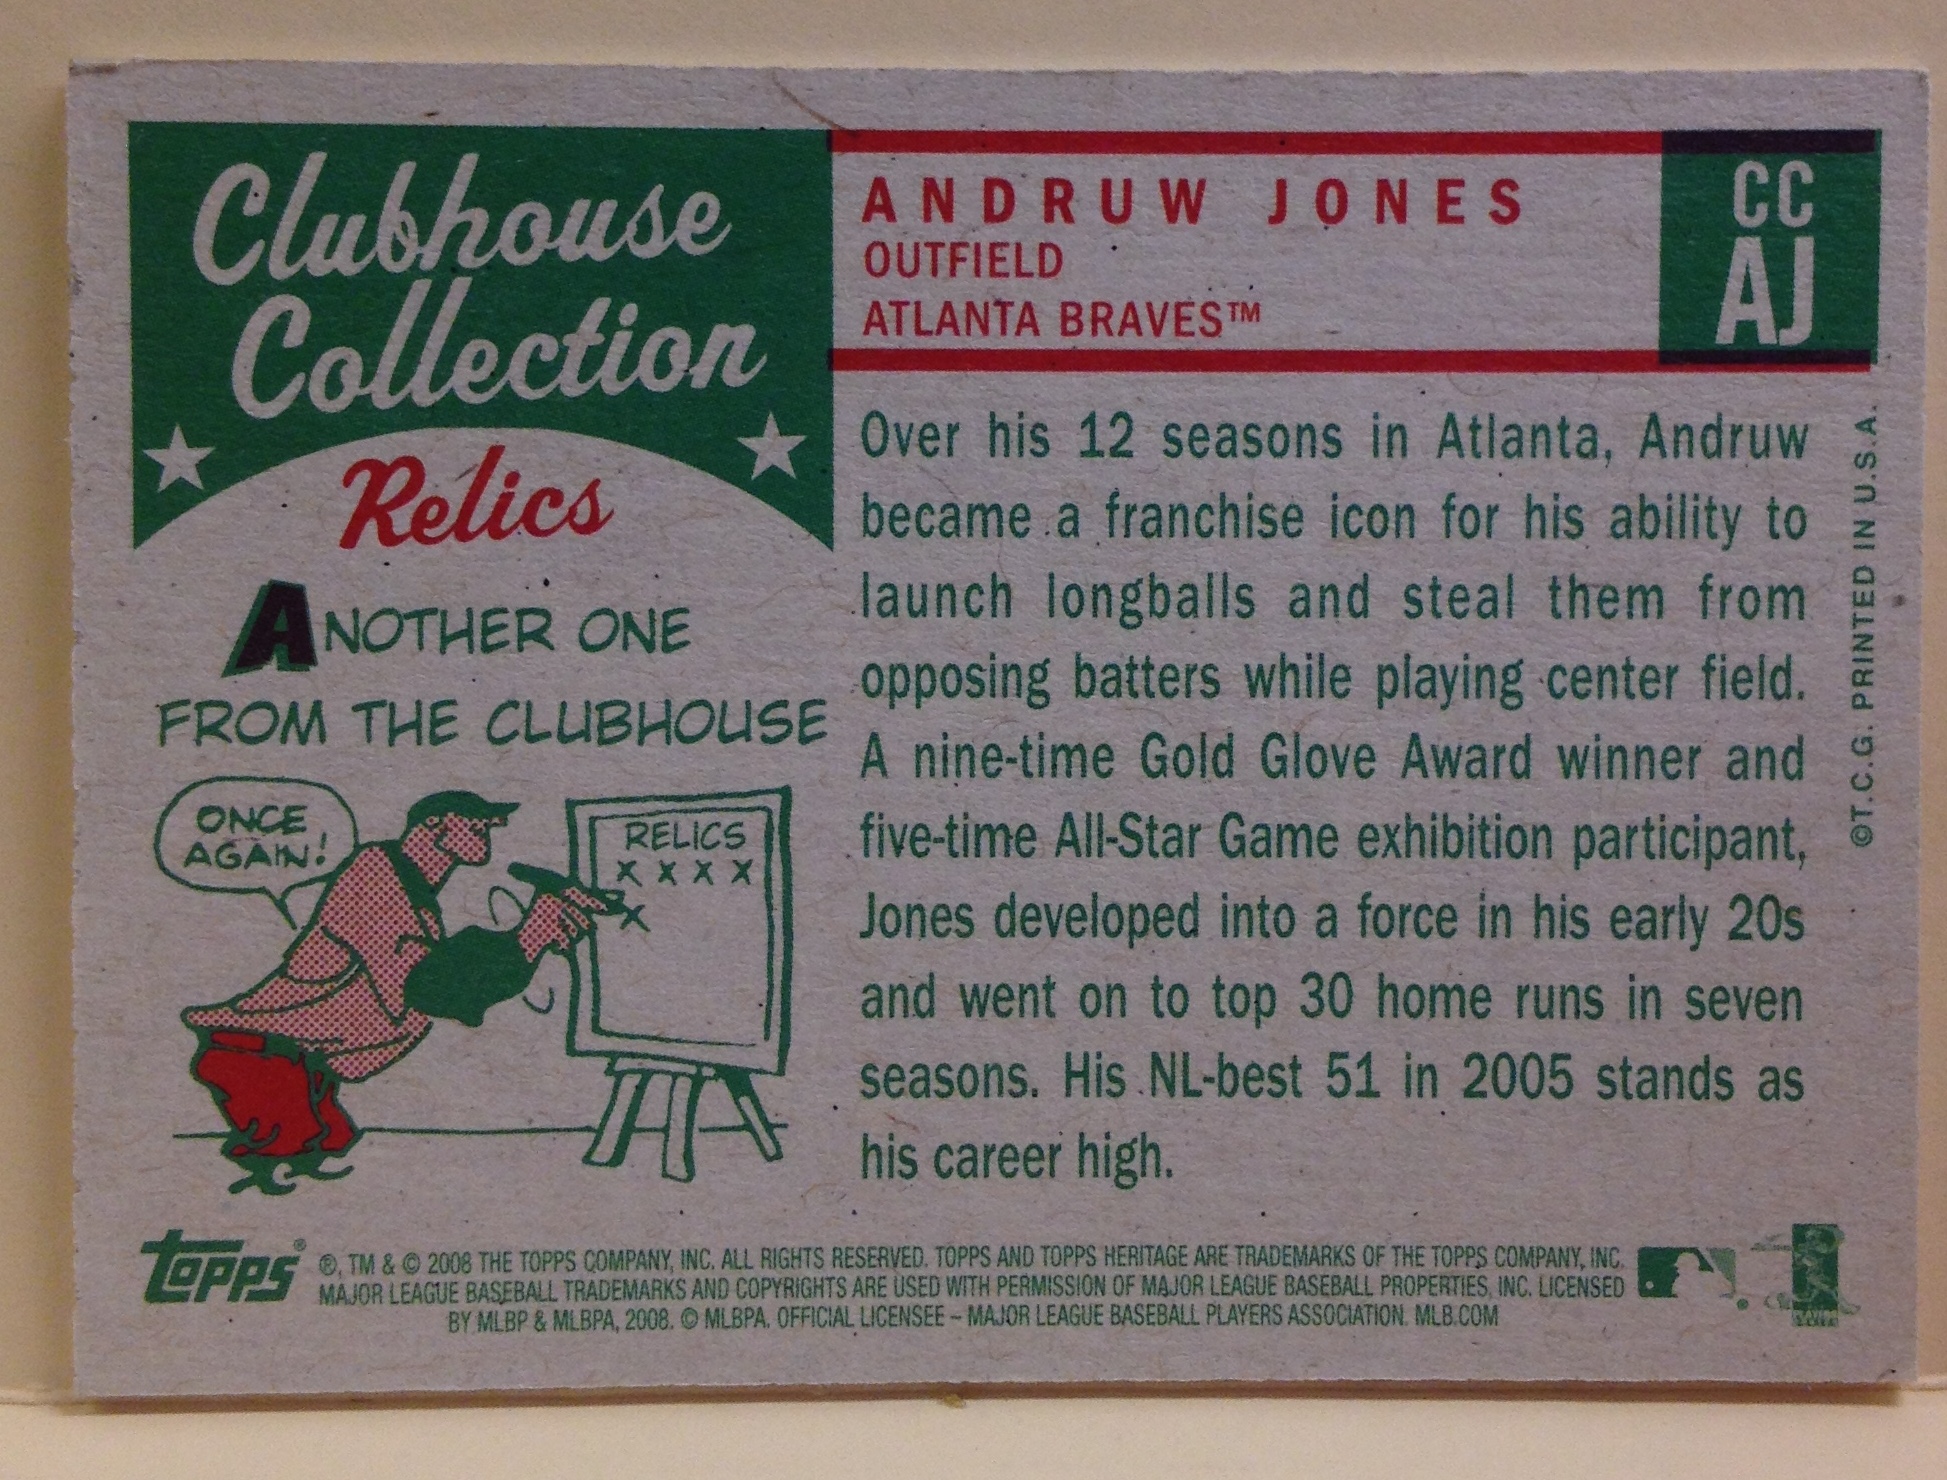 2008 Topps Heritage Clubhouse Collection Relics #AJ Andruw Jones C back image